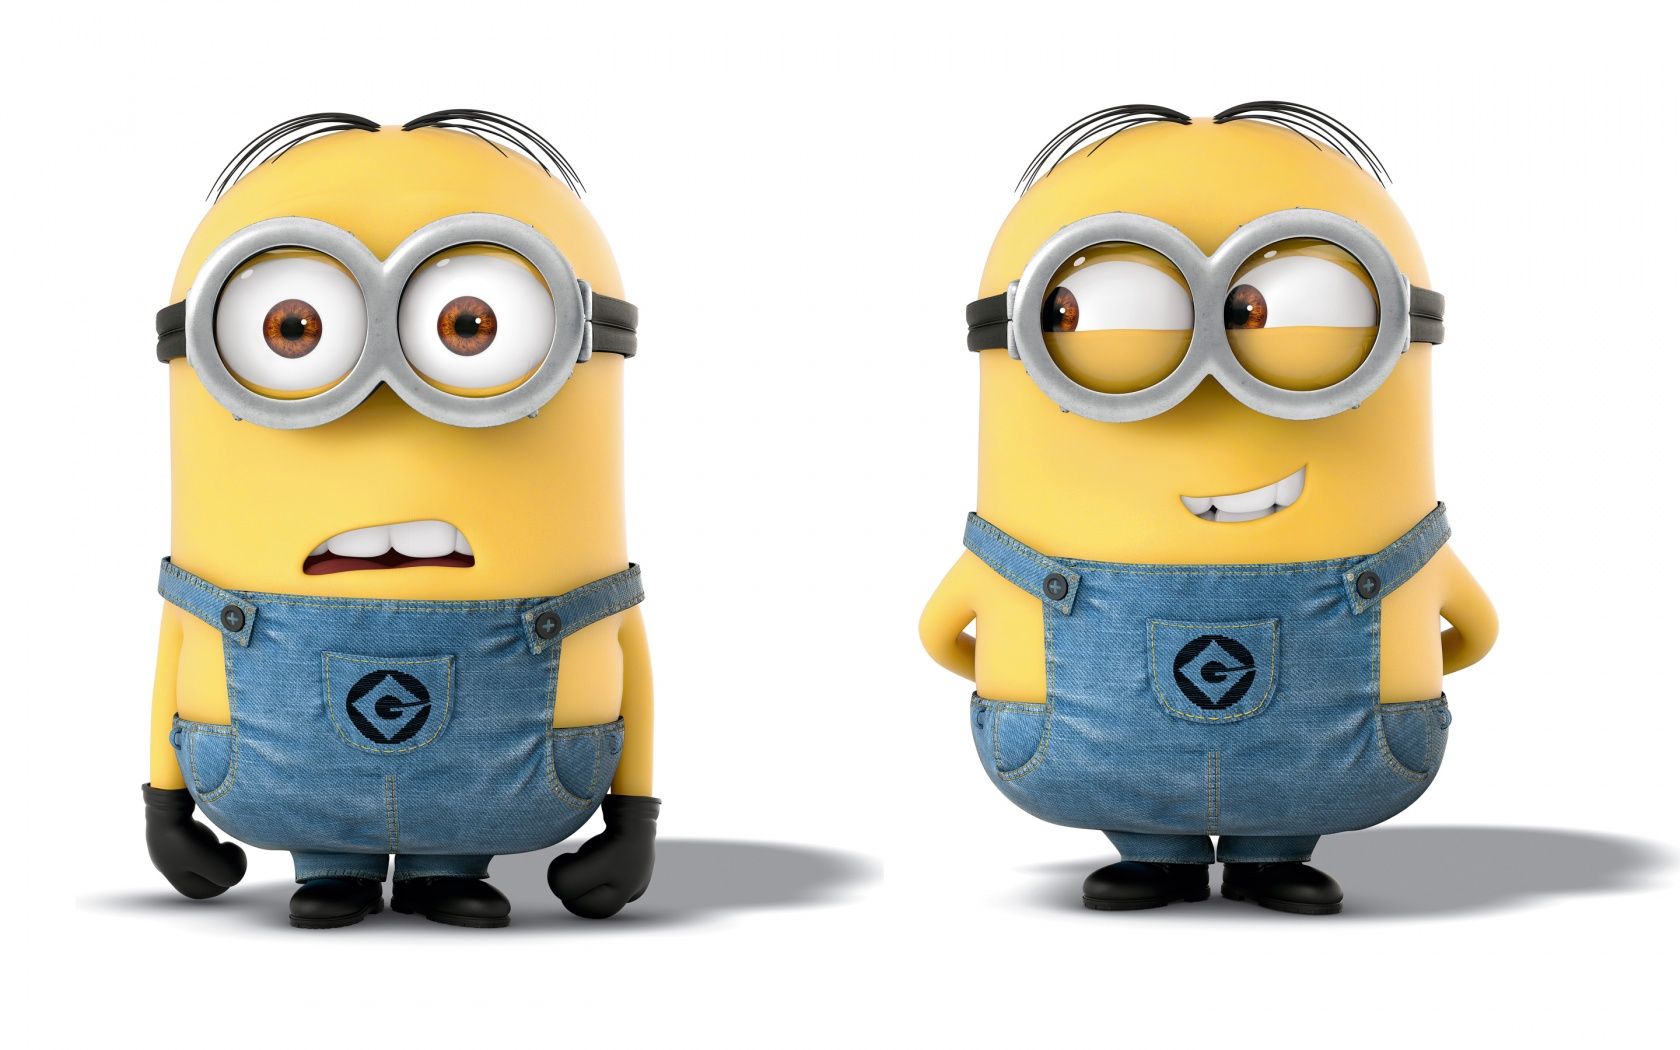 Despicable Me 2 Movie Minions HD Wallpaper - iHD Wallpapers